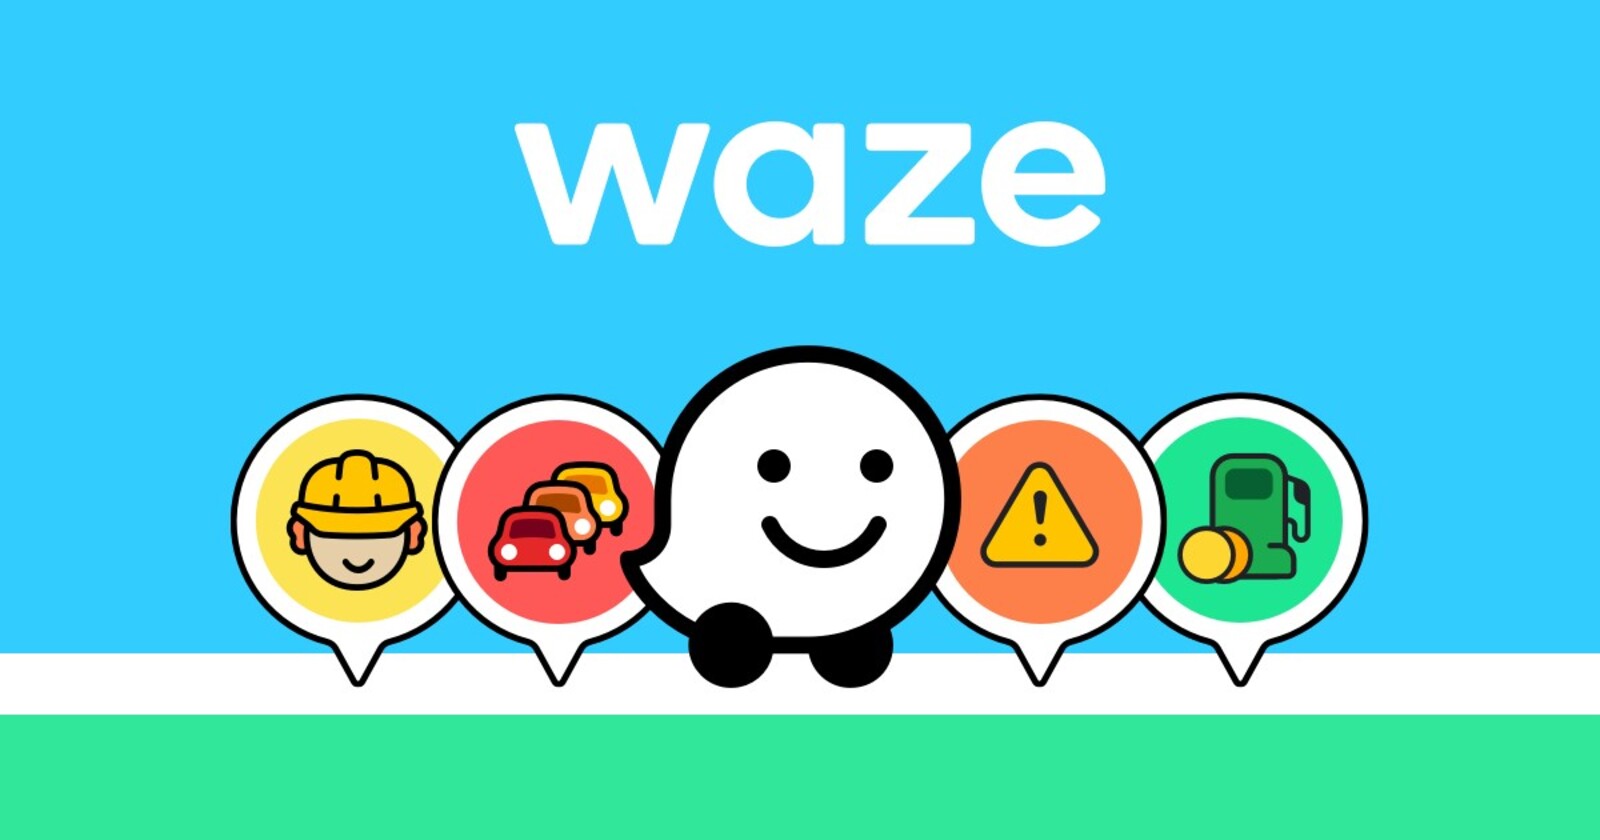 Waze alerts changing voices is a known bug, but there's no ETA for a fix